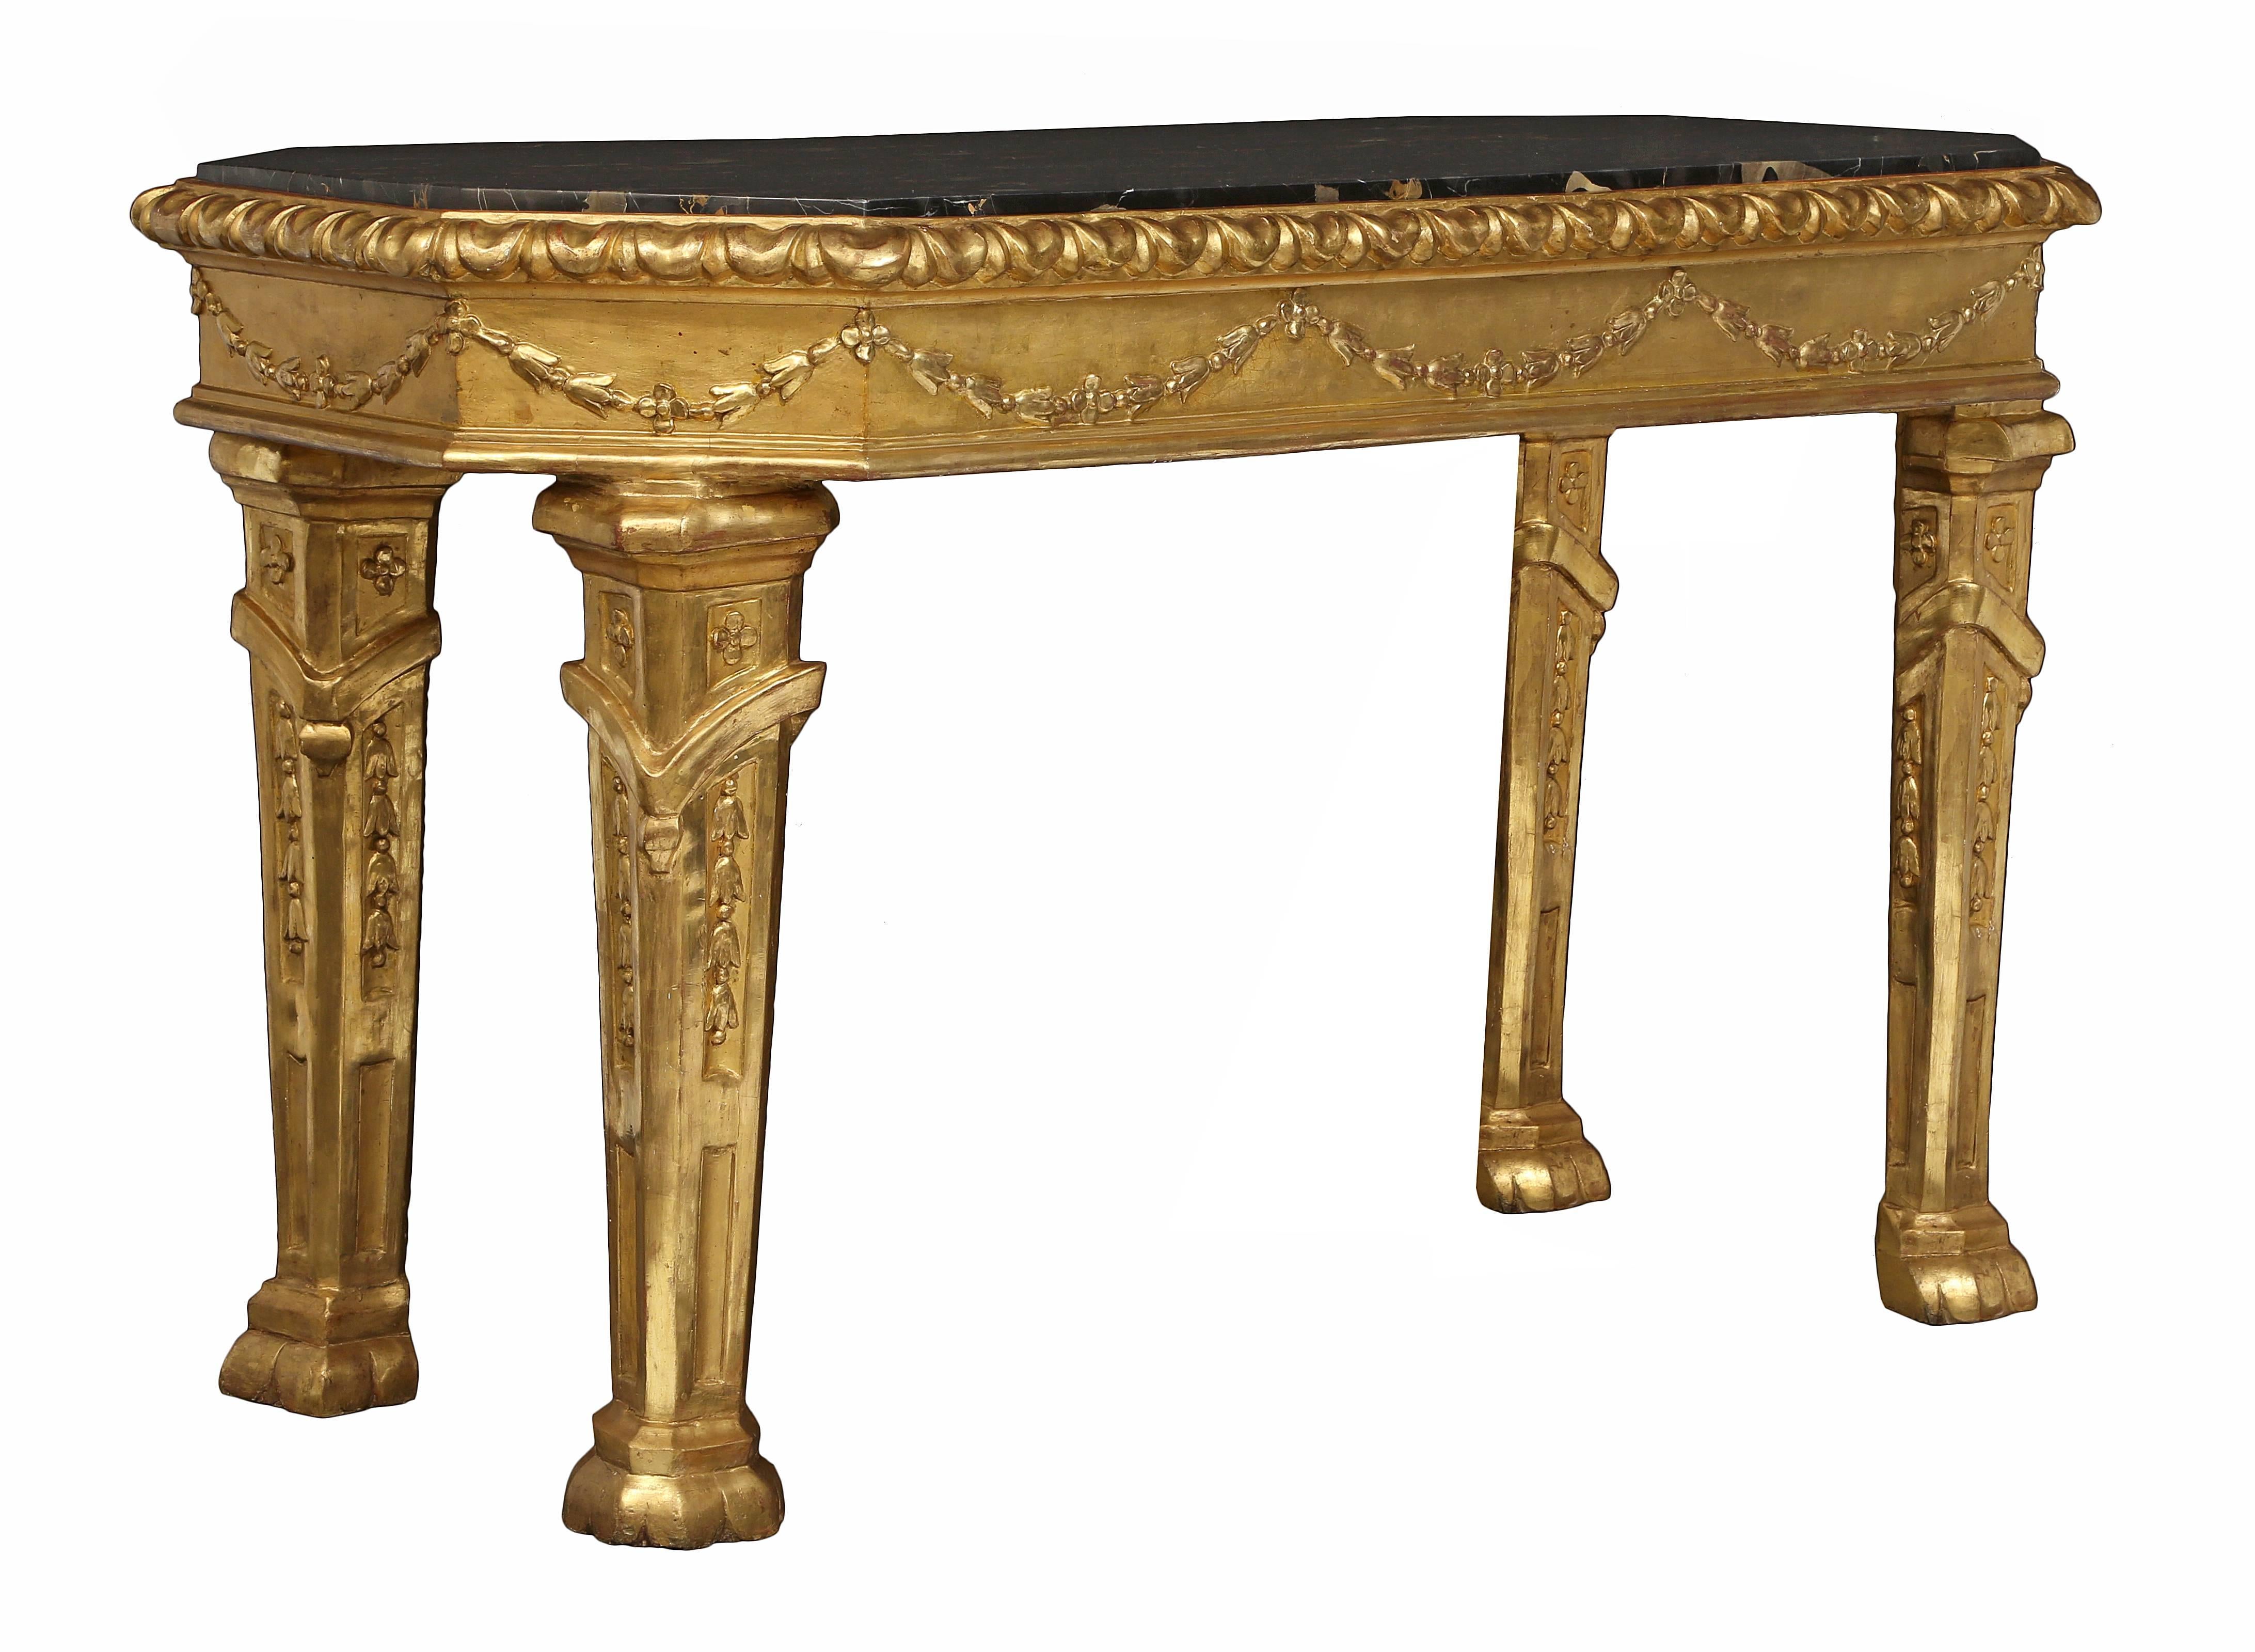 A most handsome and stately Italian 18th century Louis XIV period giltwood and marble Roman console. The freestanding octagonal console is raised by handsome robust legs, with decorative feet and richly carved recessed panels and fitted floral